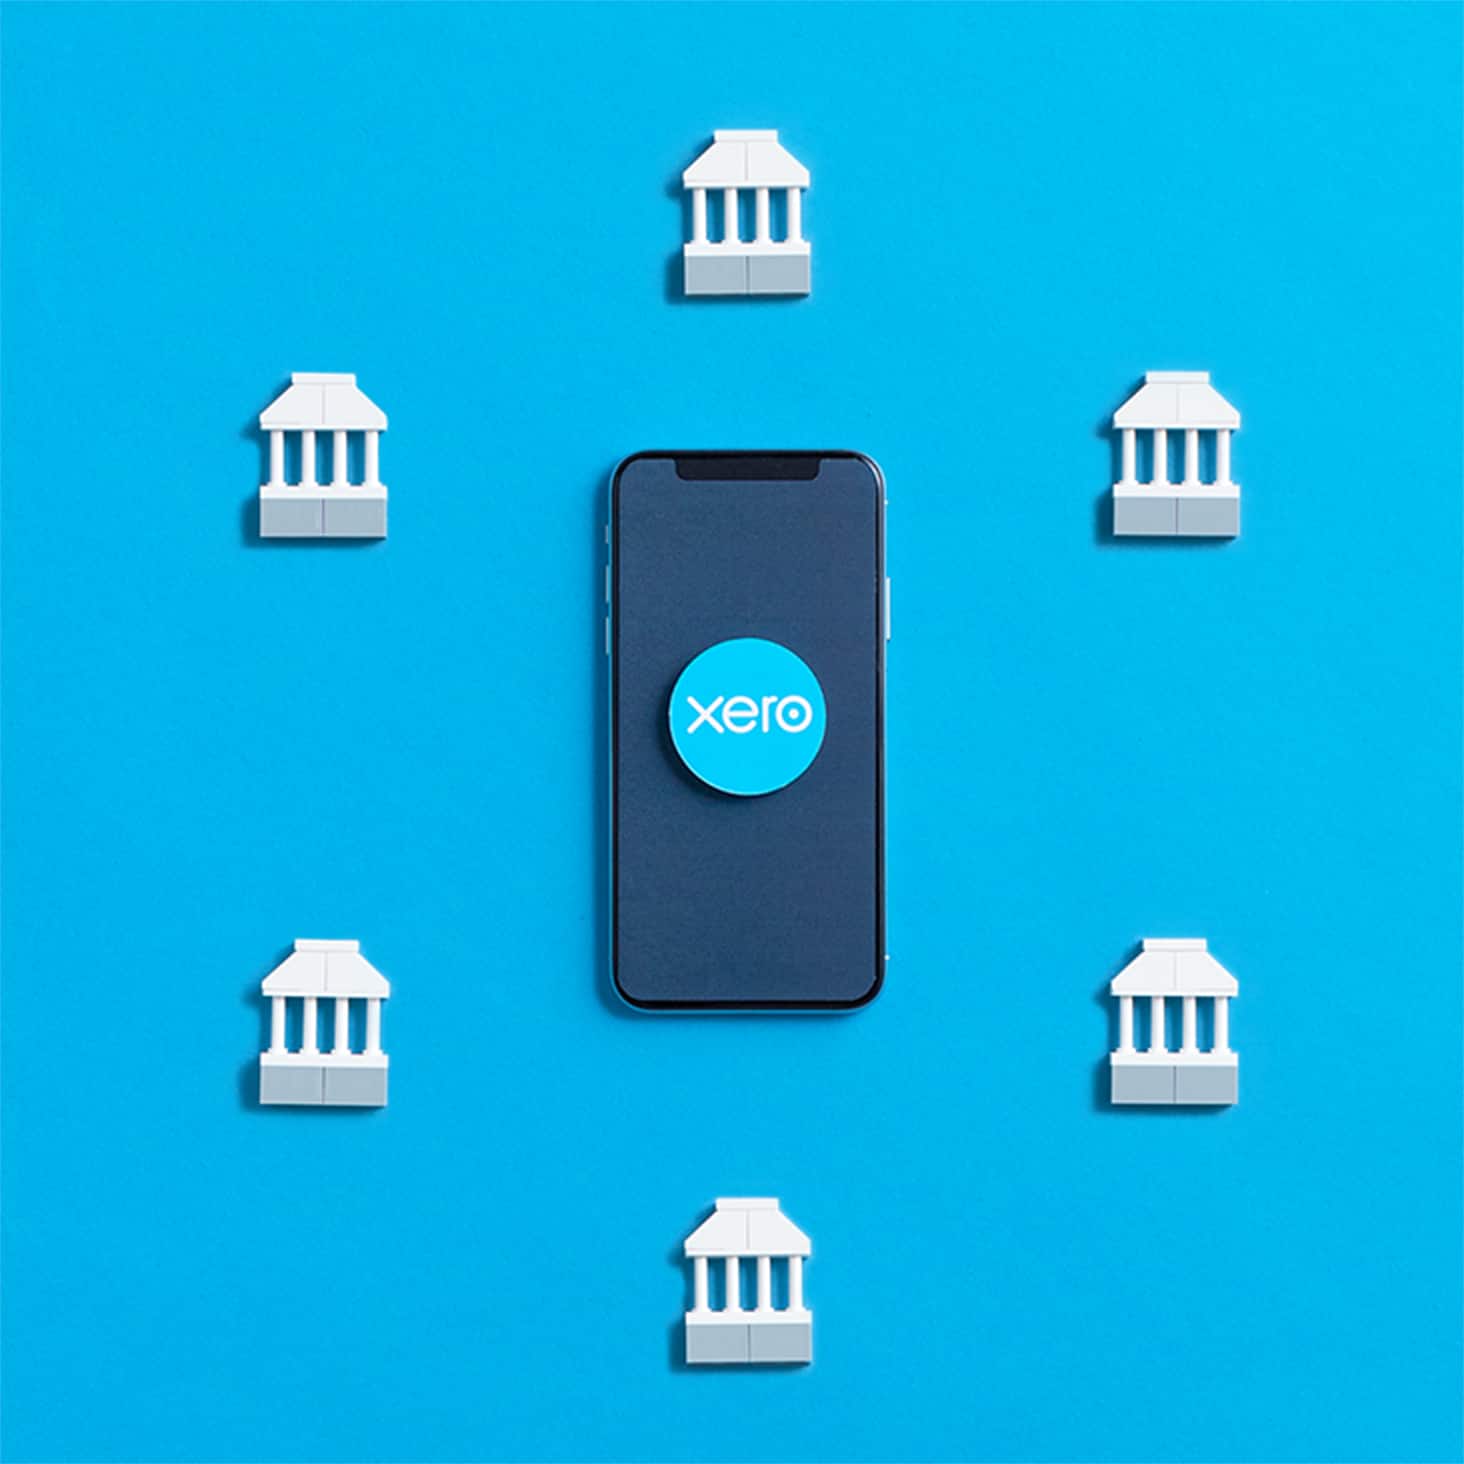 Icons of bank buildings surround a mobile phone where the Xero app receives bank feeds.